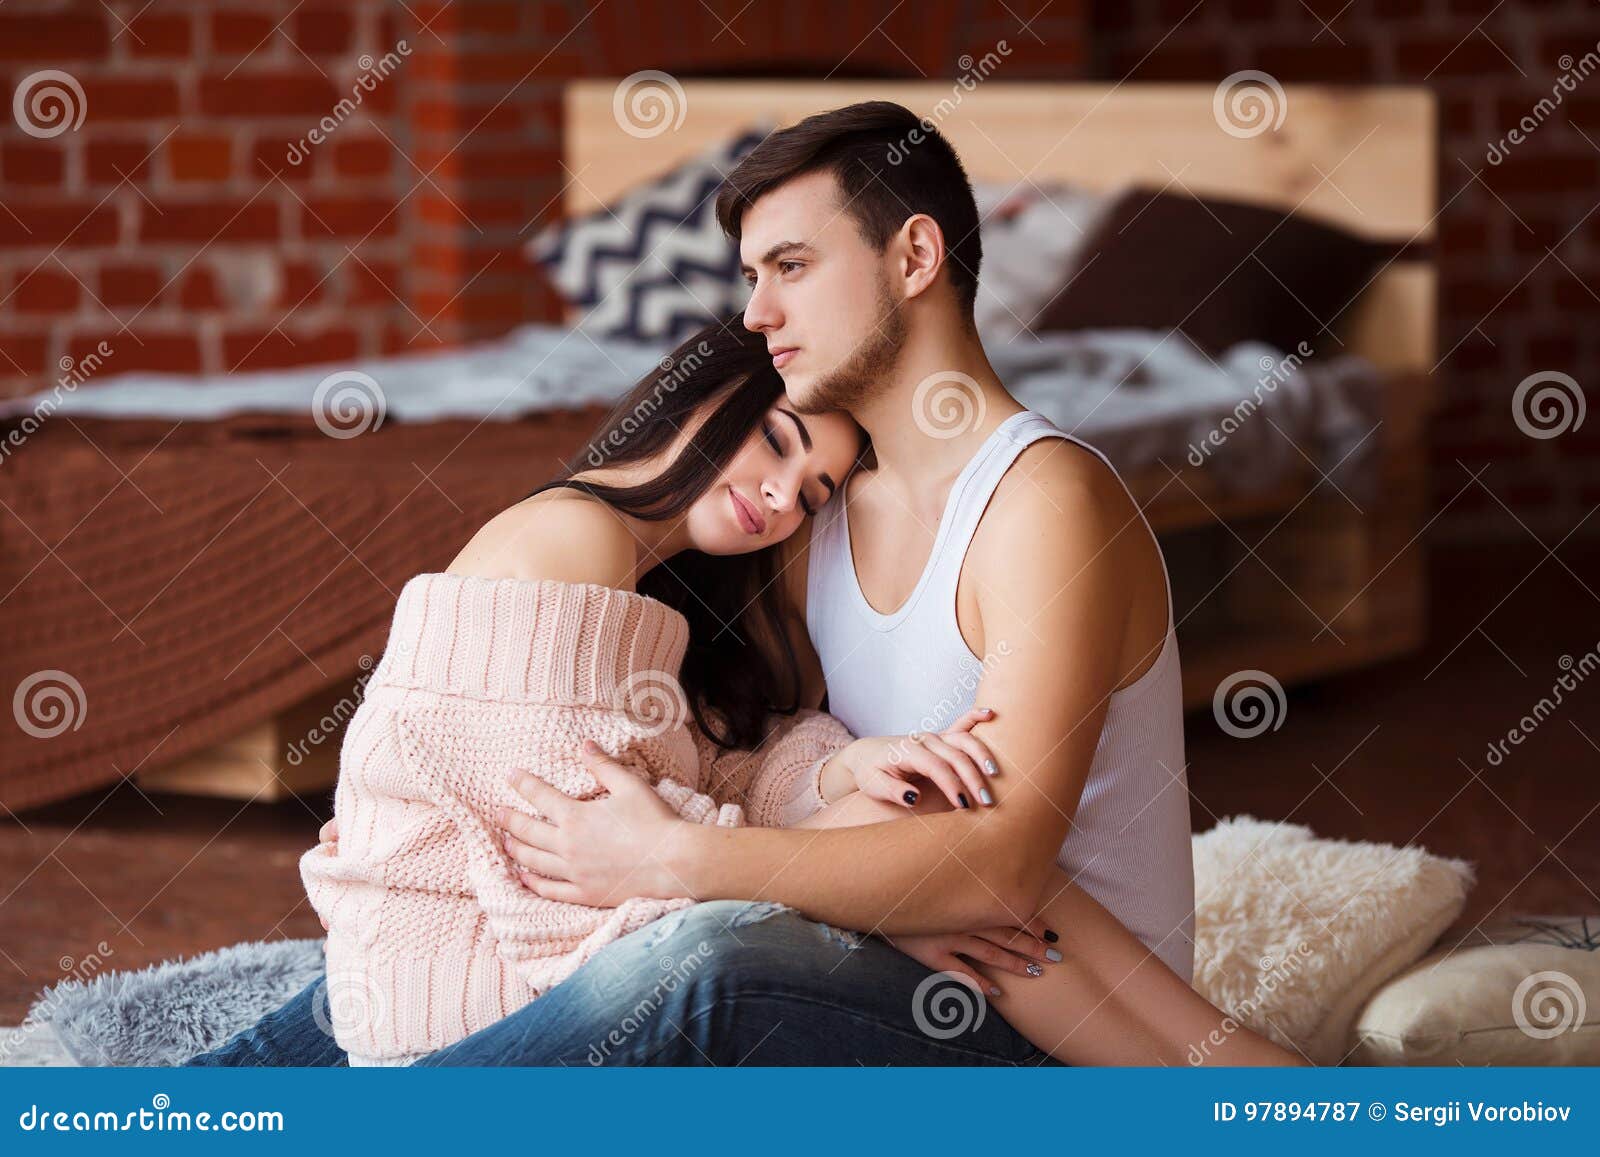 Romantic Couple. Passion Time. Young Loving Couple Embracing and ...